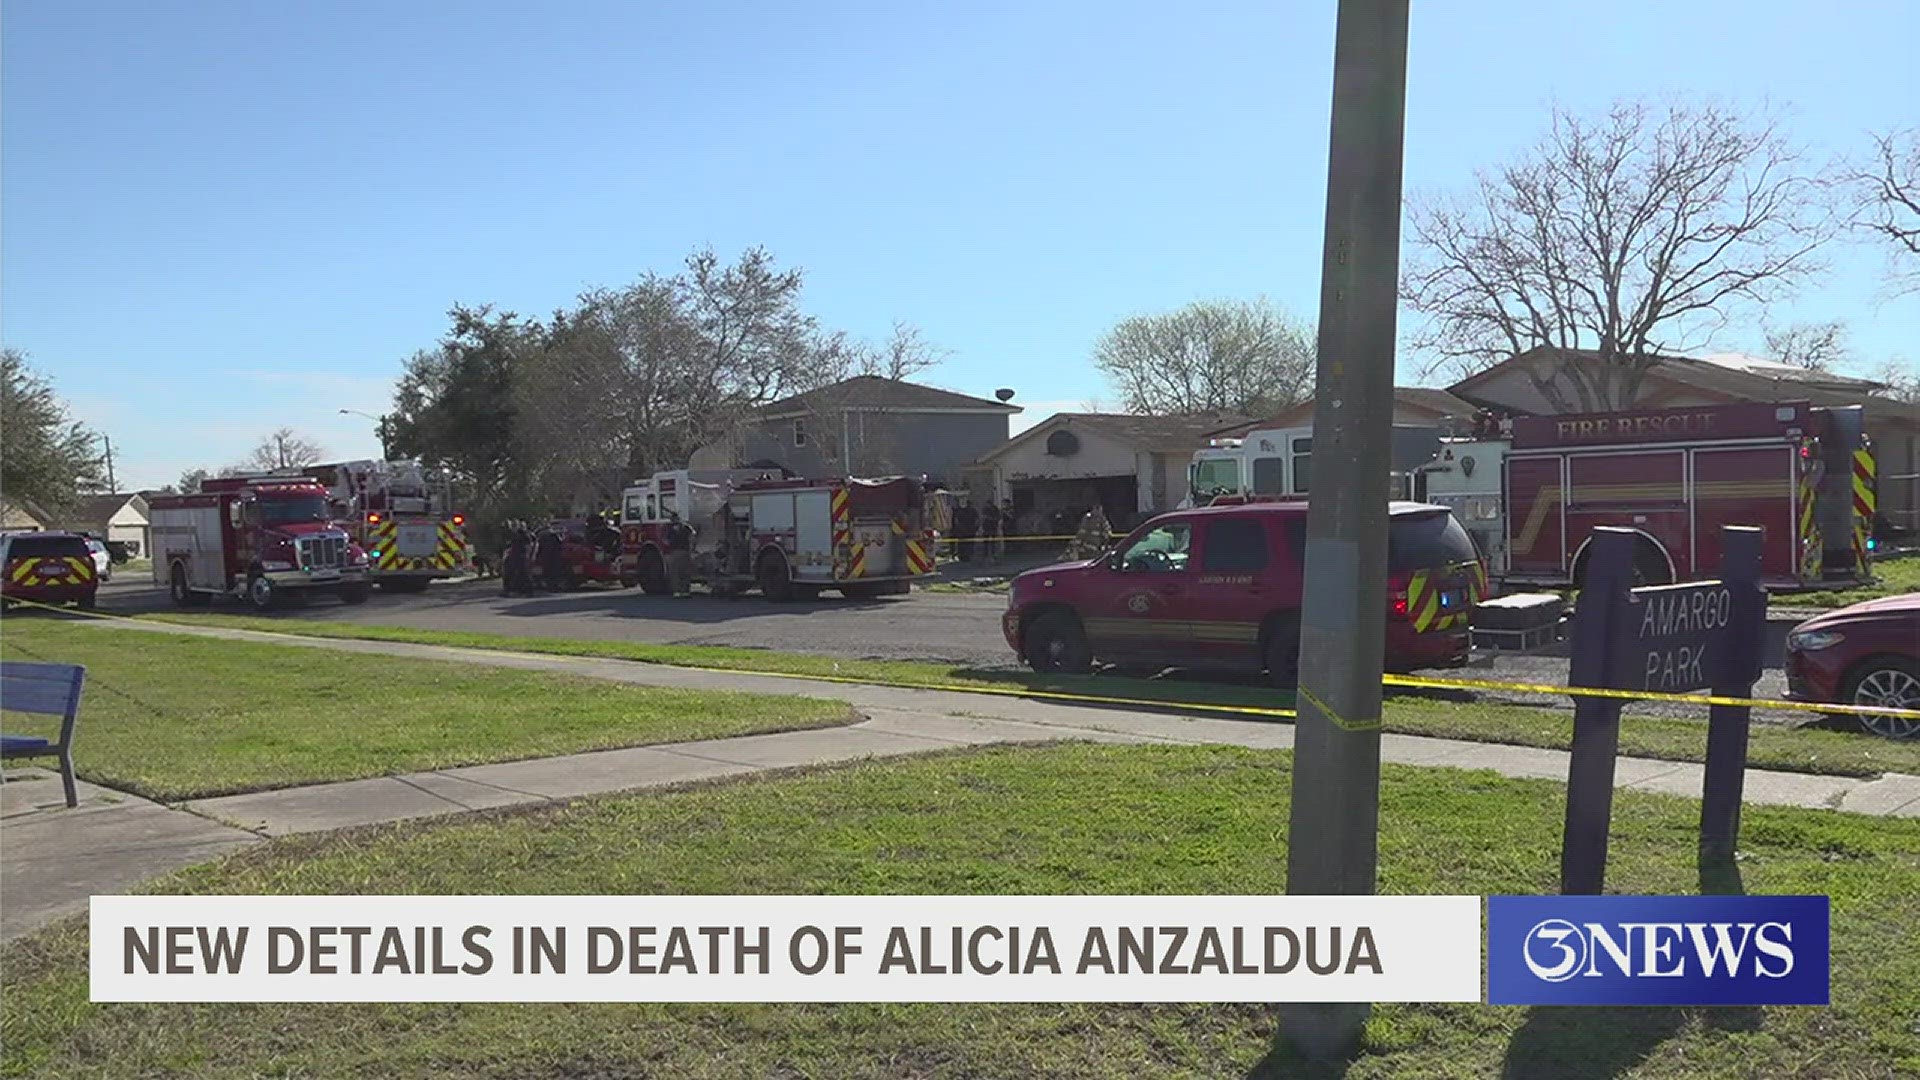 According to the affidavit, firefighters found that fires had been started in multiple rooms of the house, including the living room, kitchen and garage.